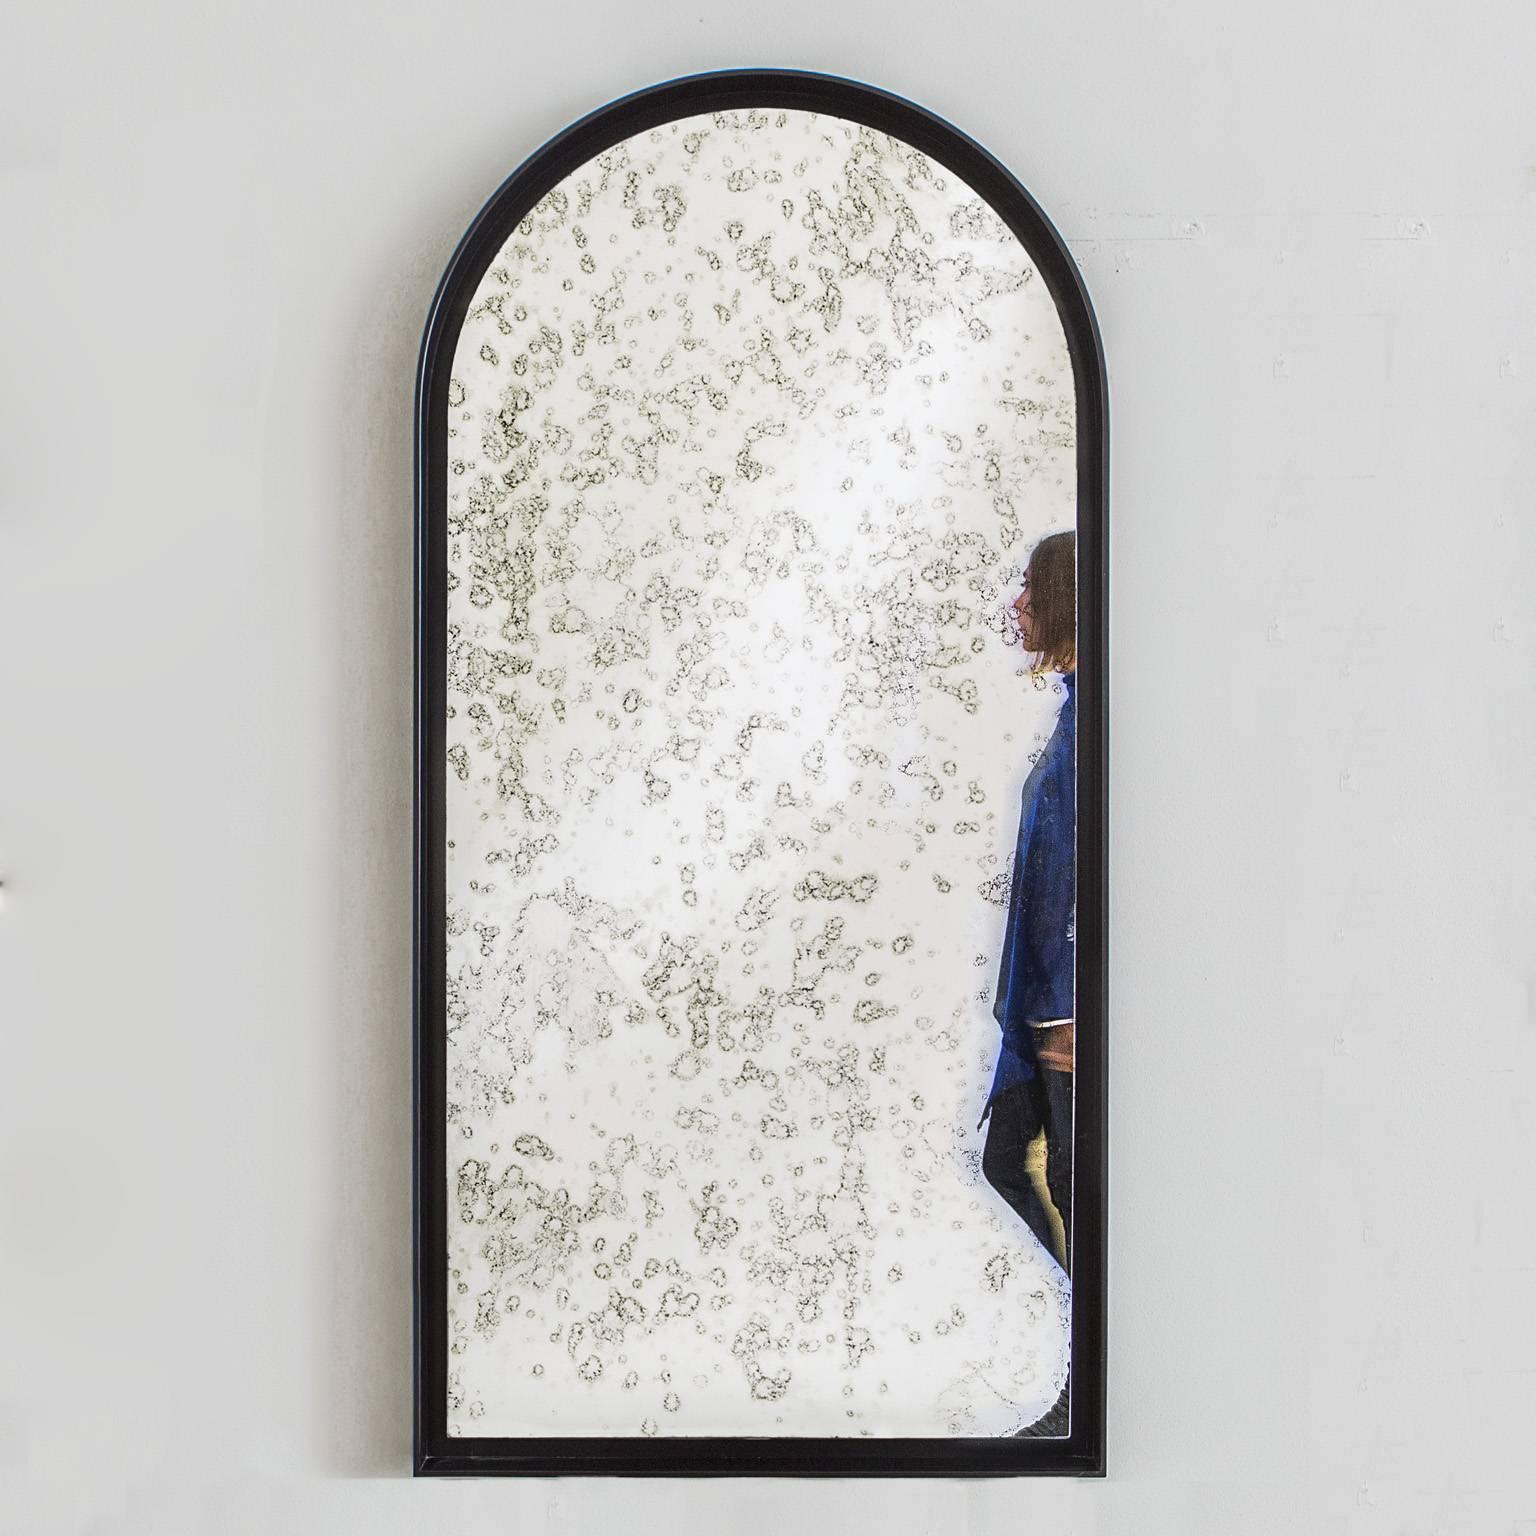 The mirrors are inspired to the architectonical shape of the Classic Venetian window. The idea is to create a window that reflects the scenario of your own room, which makes an illusion and a poetic opening in the space,
with Panorami mirror Zaven